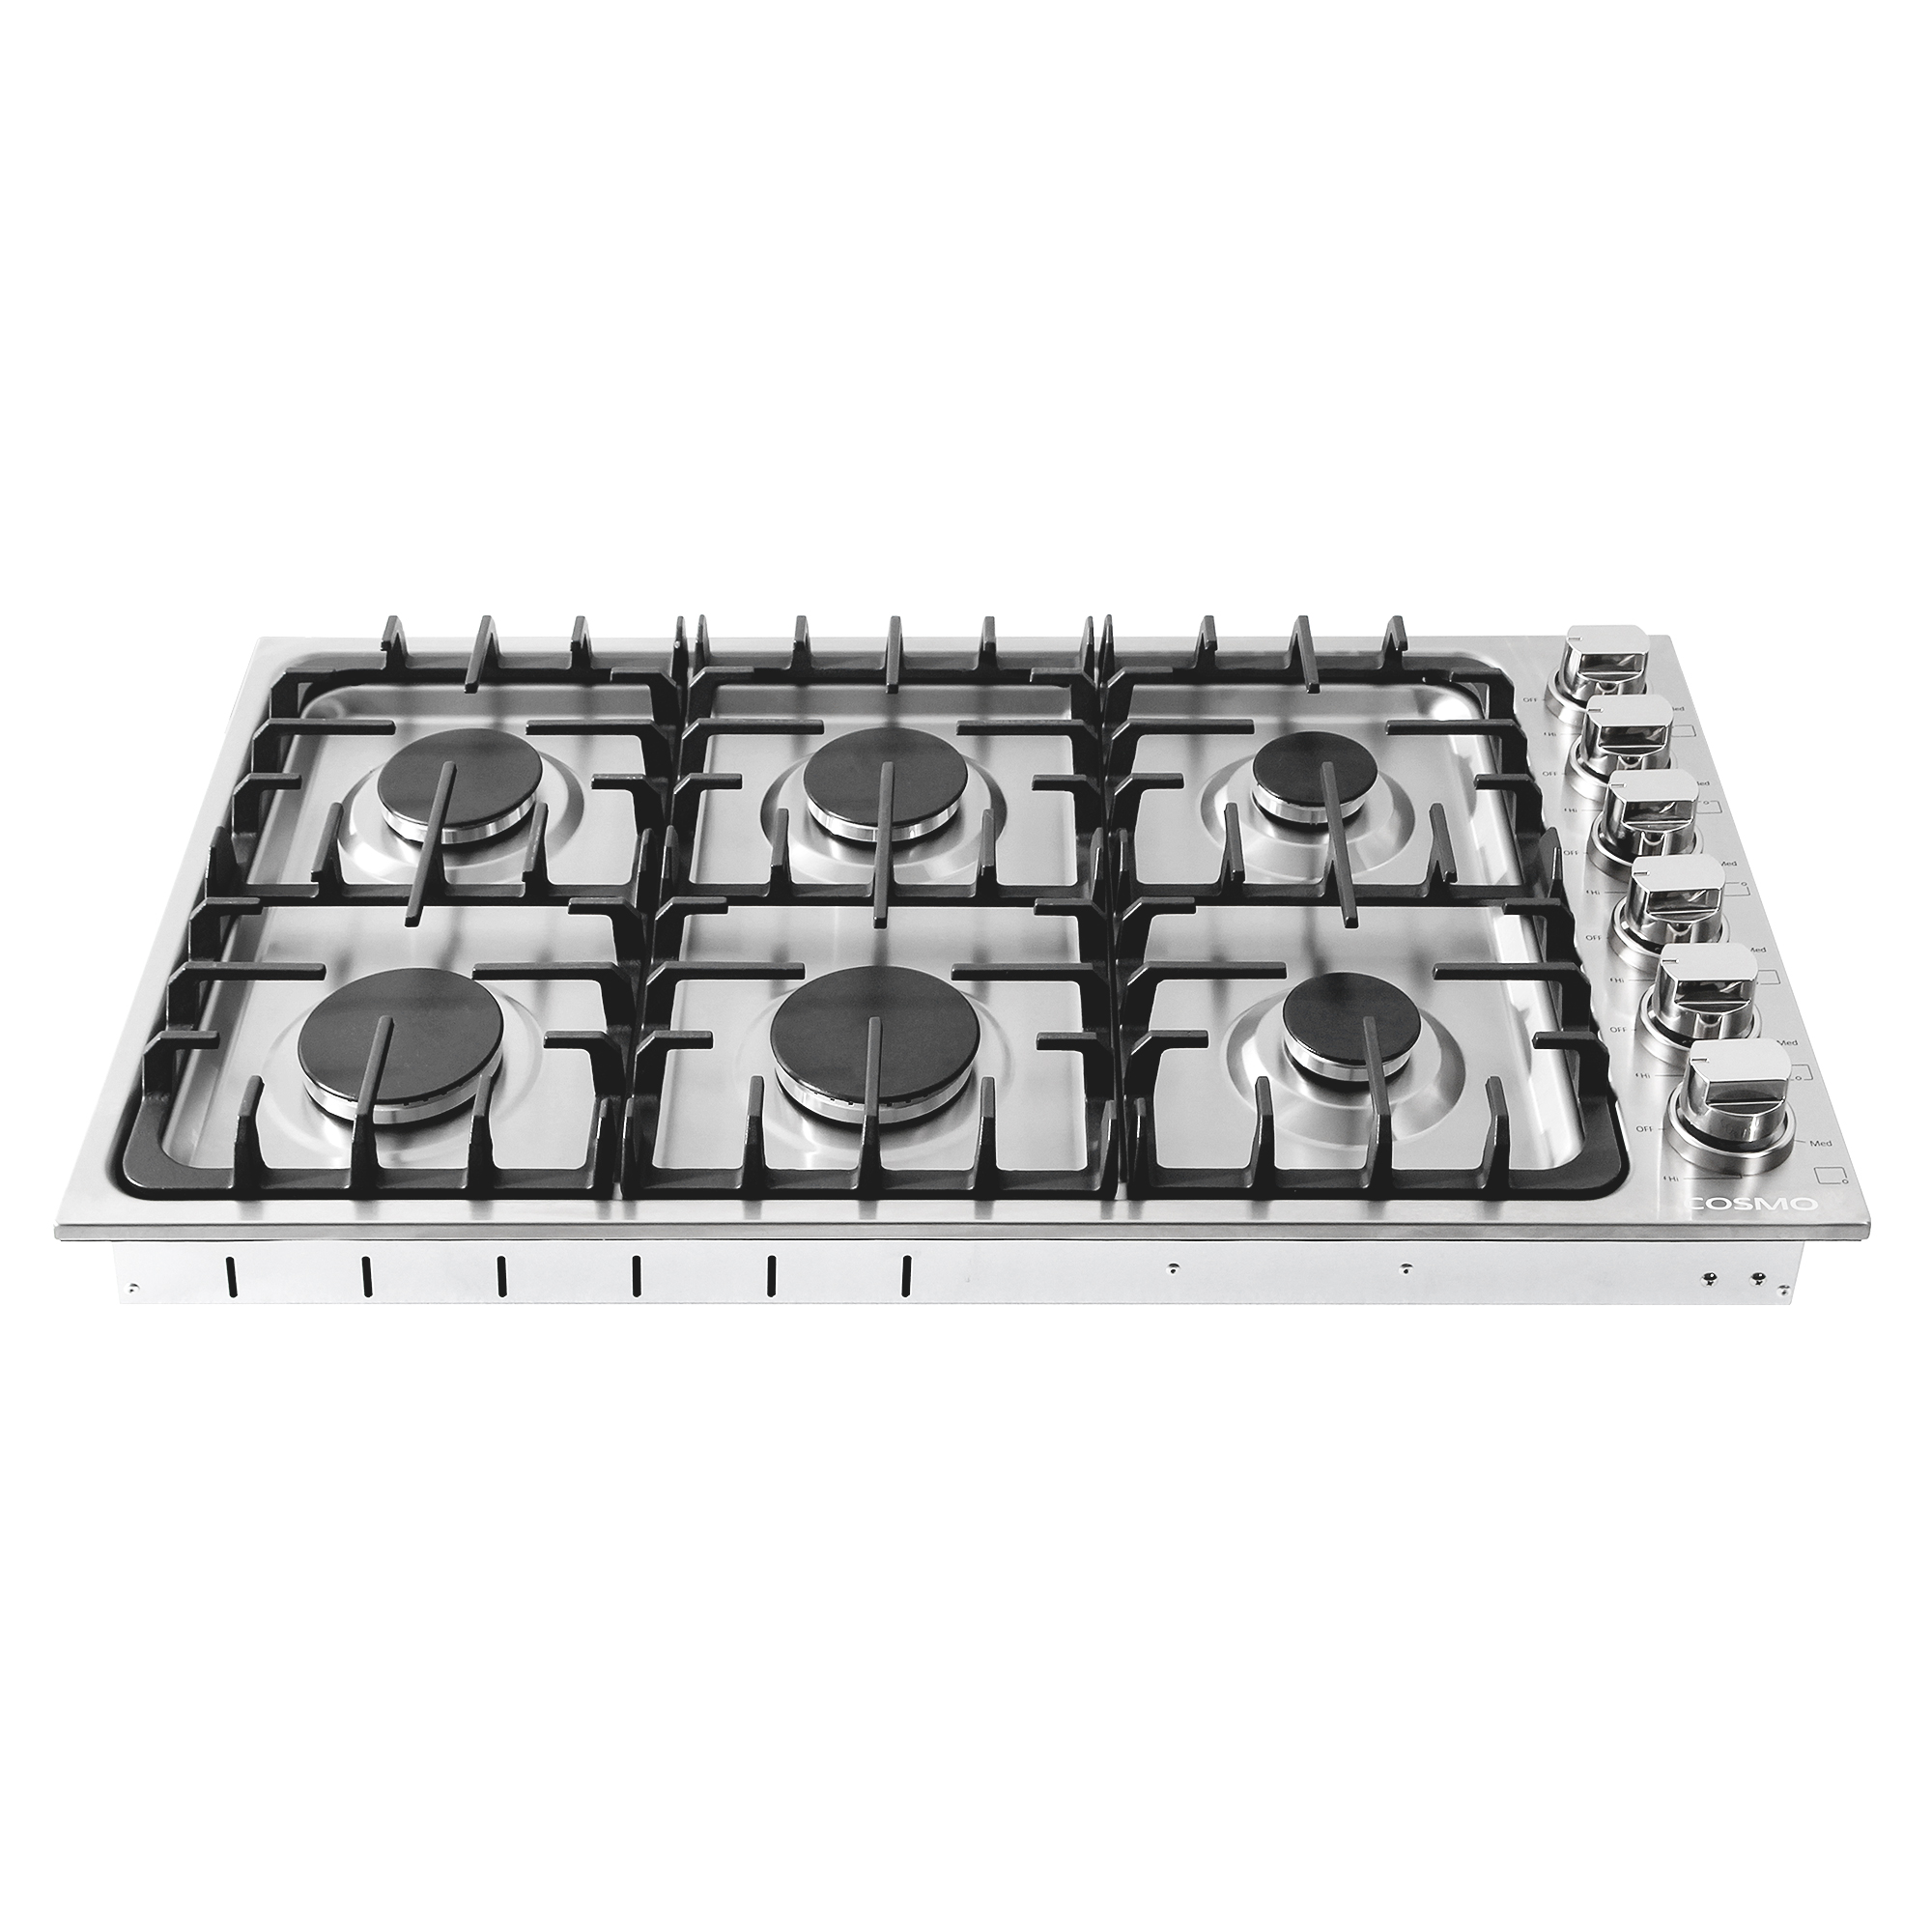 Cosmo 36 in. Gas Cooktop in Stainless Steel with 6 Italian Made Burners